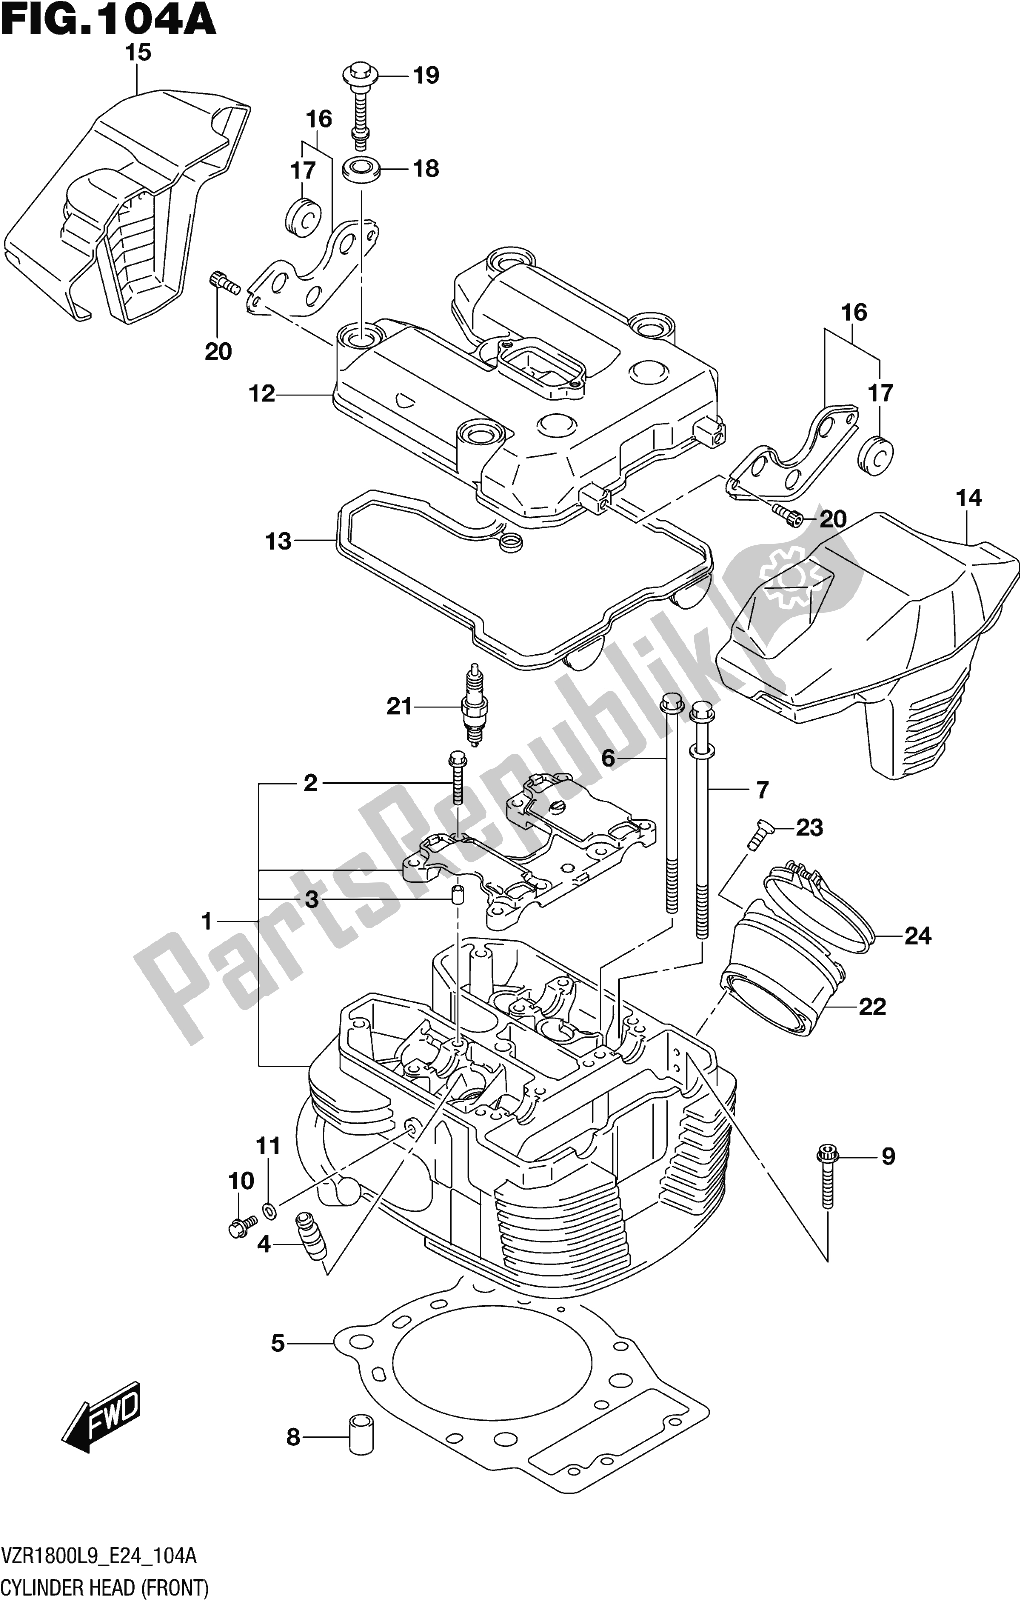 All parts for the Fig. 104a Cylinder Head (front) (vzr1800l9 E24) of the Suzuki VZR 1800 2019